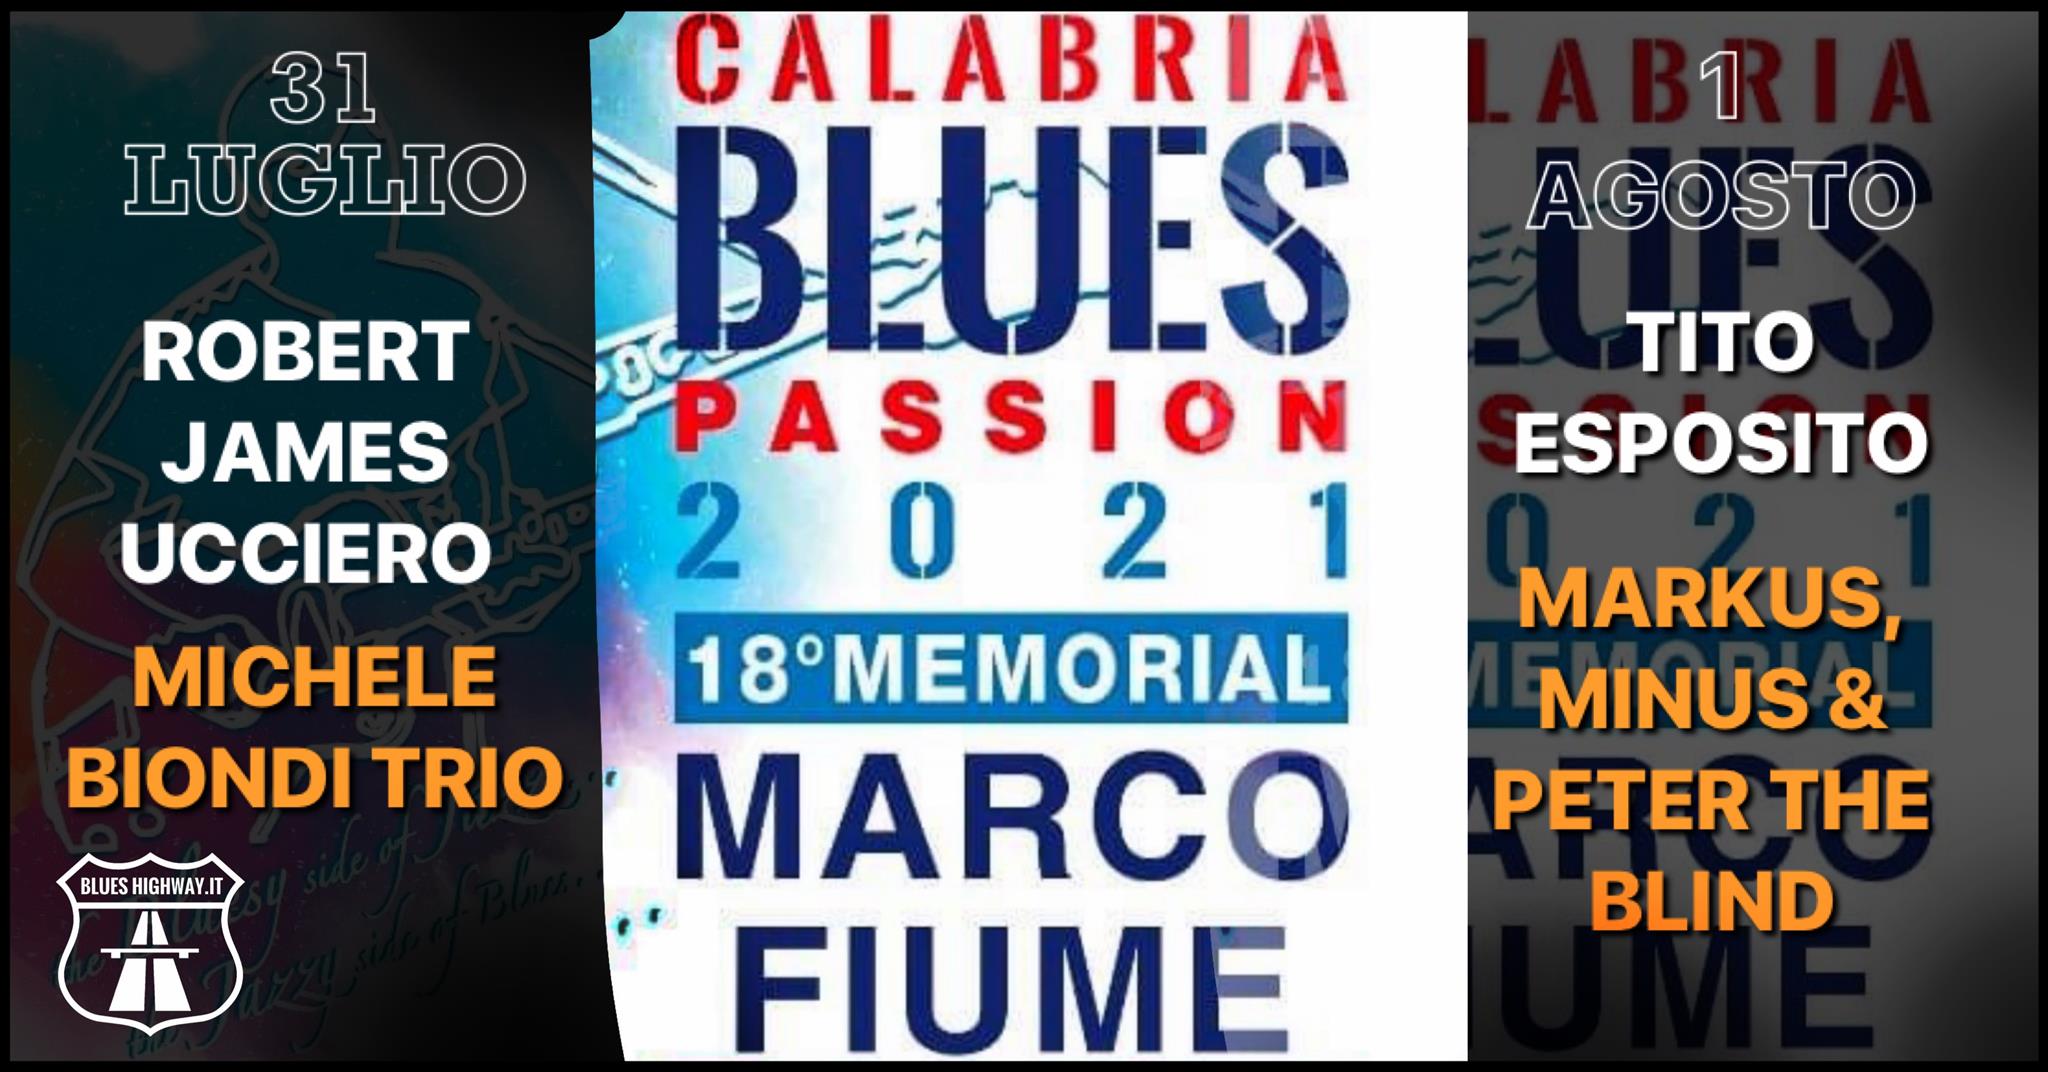 CALABRIA BLUES PASSION - MEMORIAL MARCO FIUME 2021